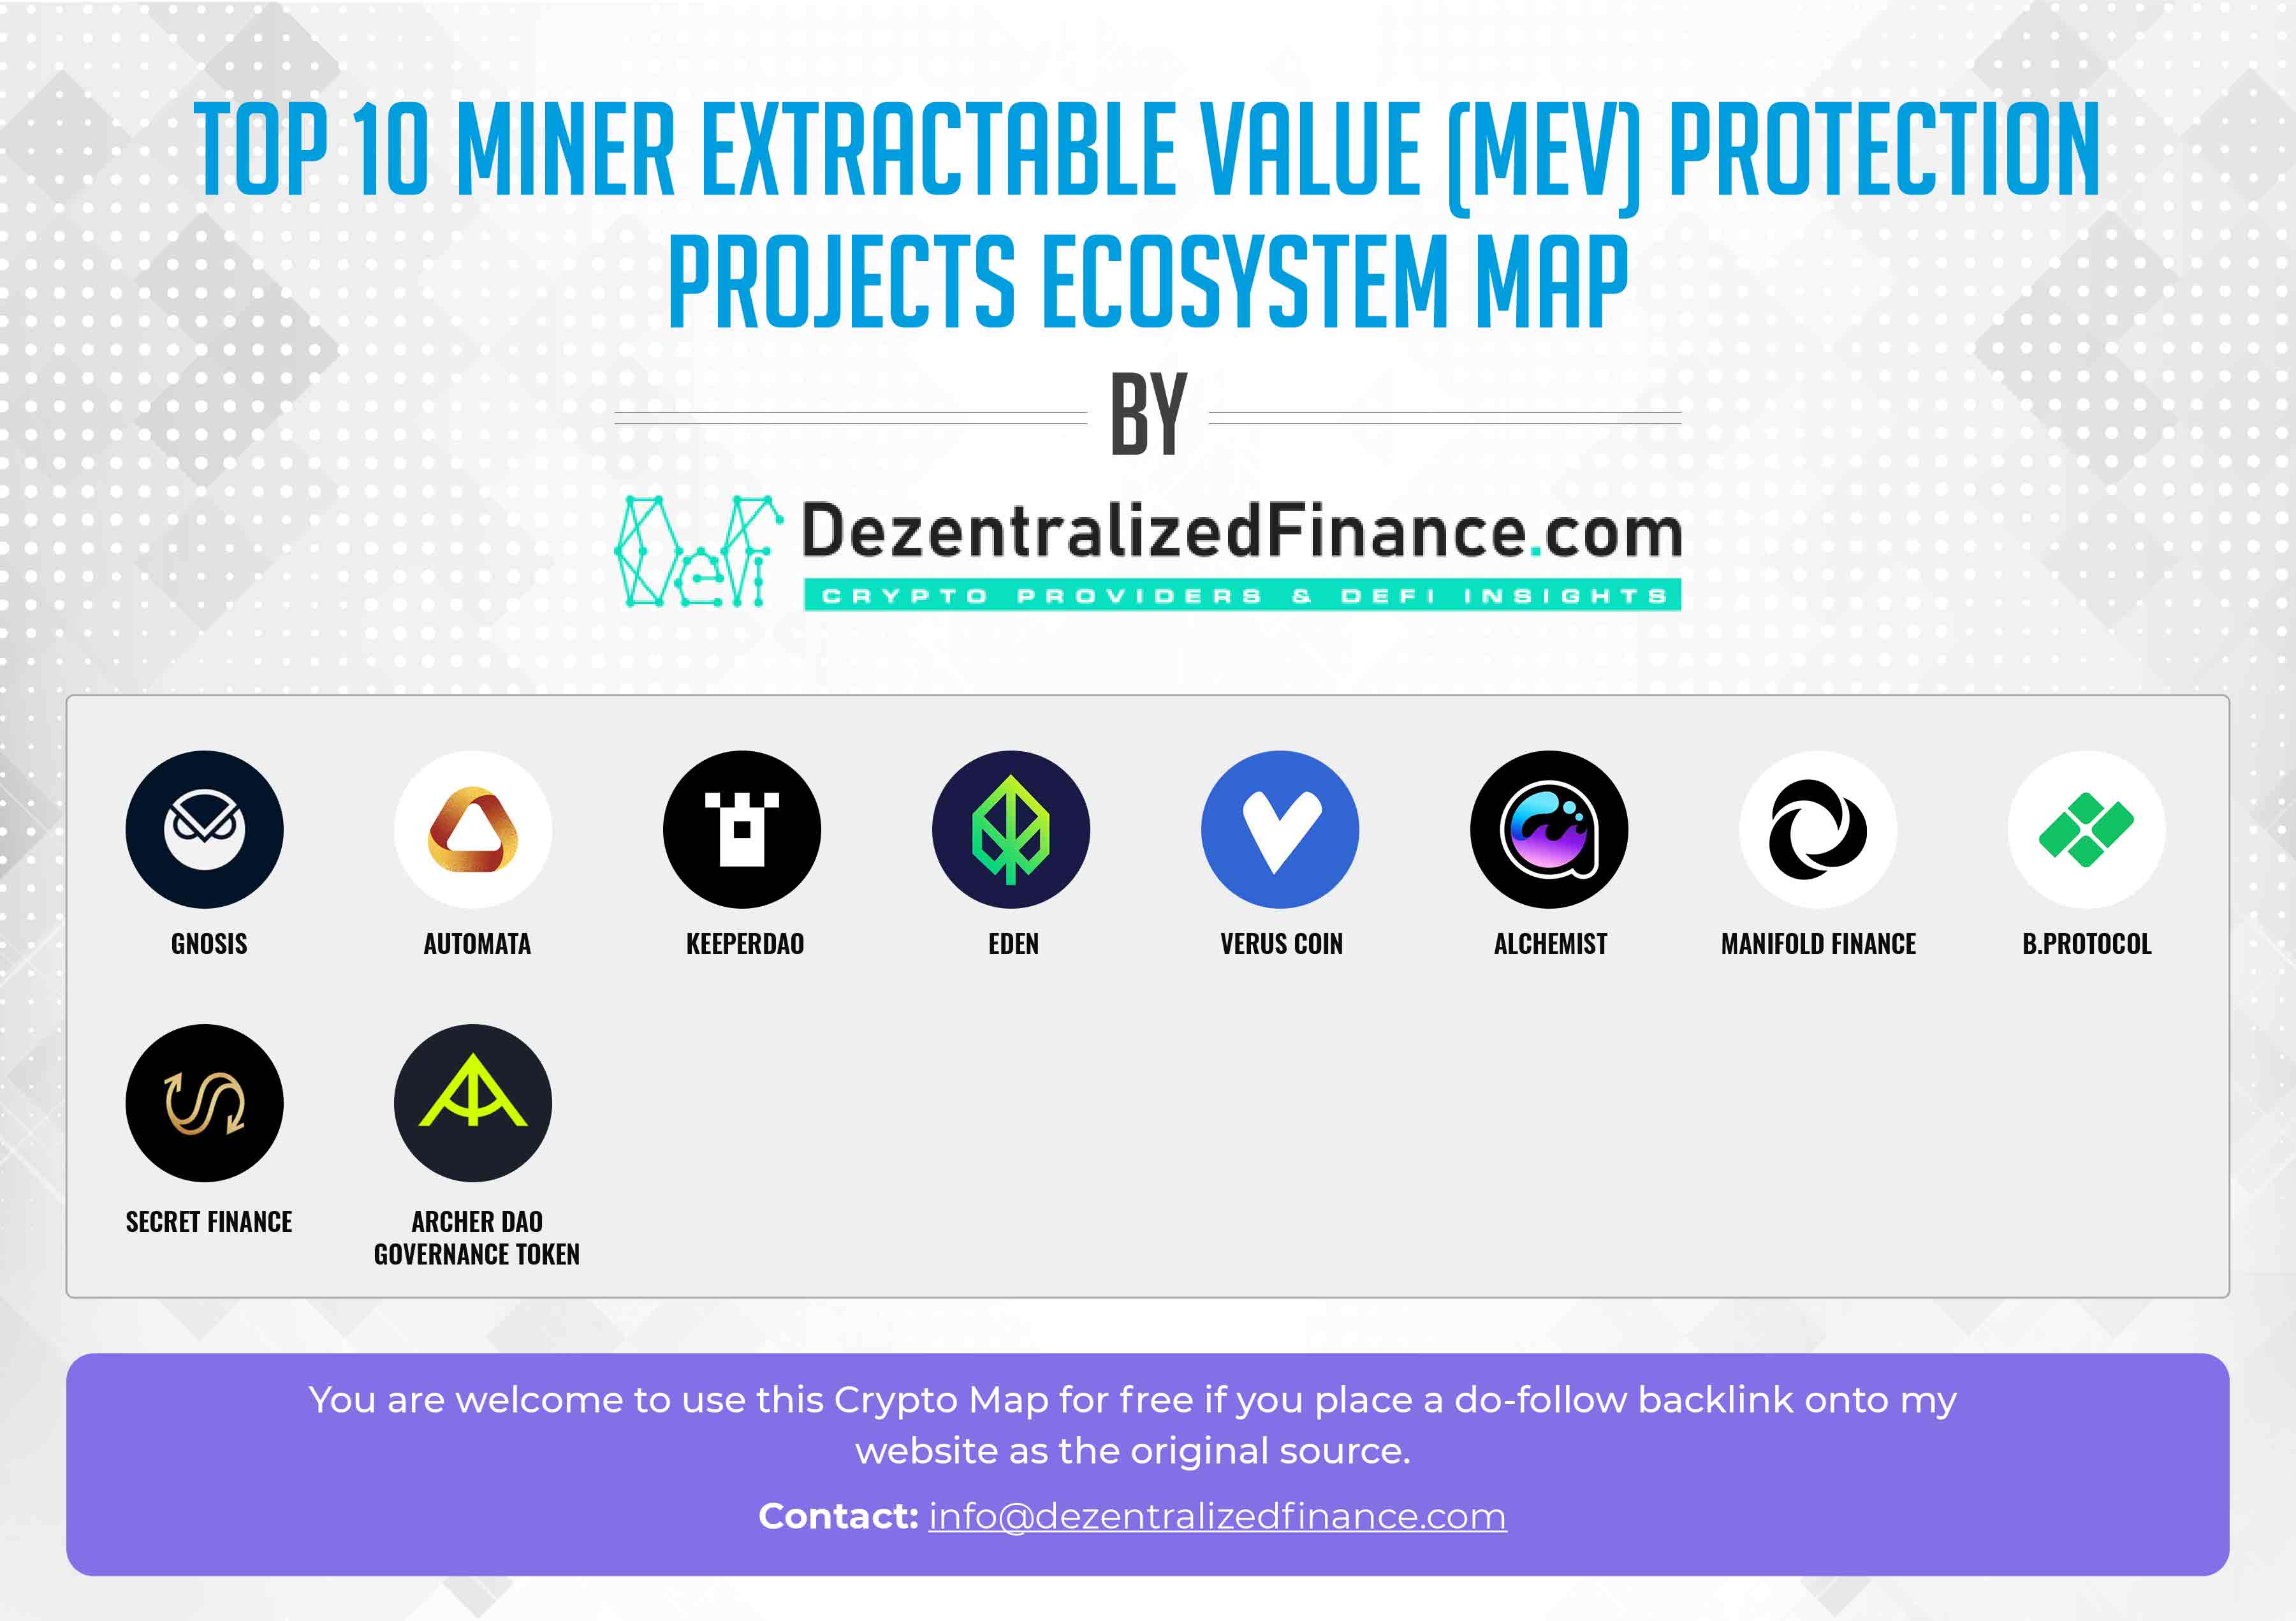 Top-10-Miner-Extractable-Value-MEV-Protection-Projects-Ecosystem